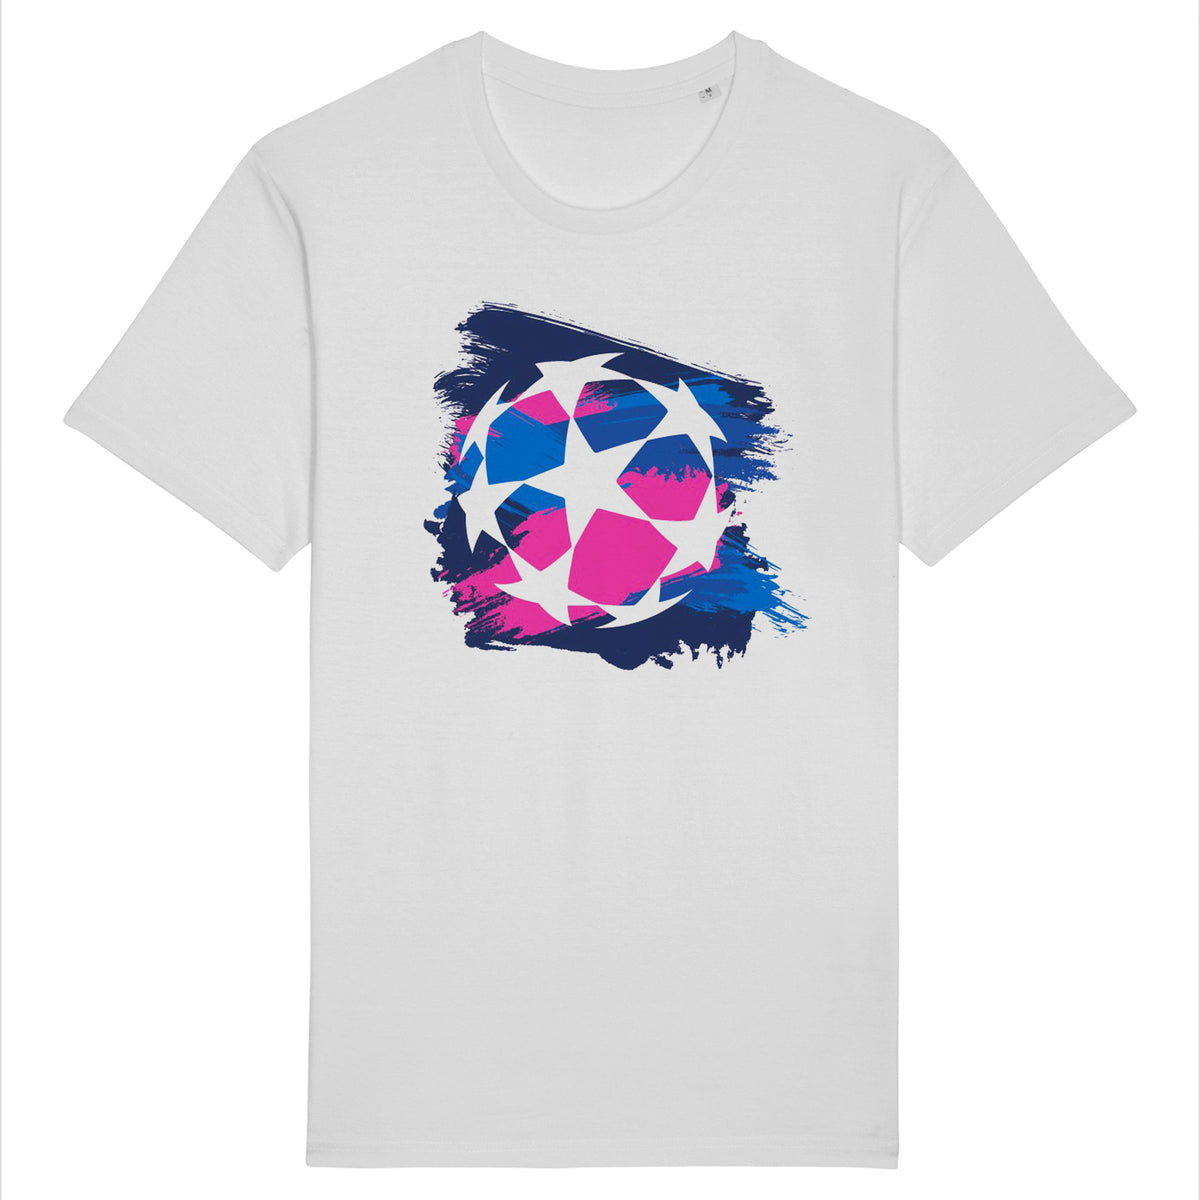 UEFA Champions League - Starball Grunge White T-Shirt UEFA Club Competitions Online Store